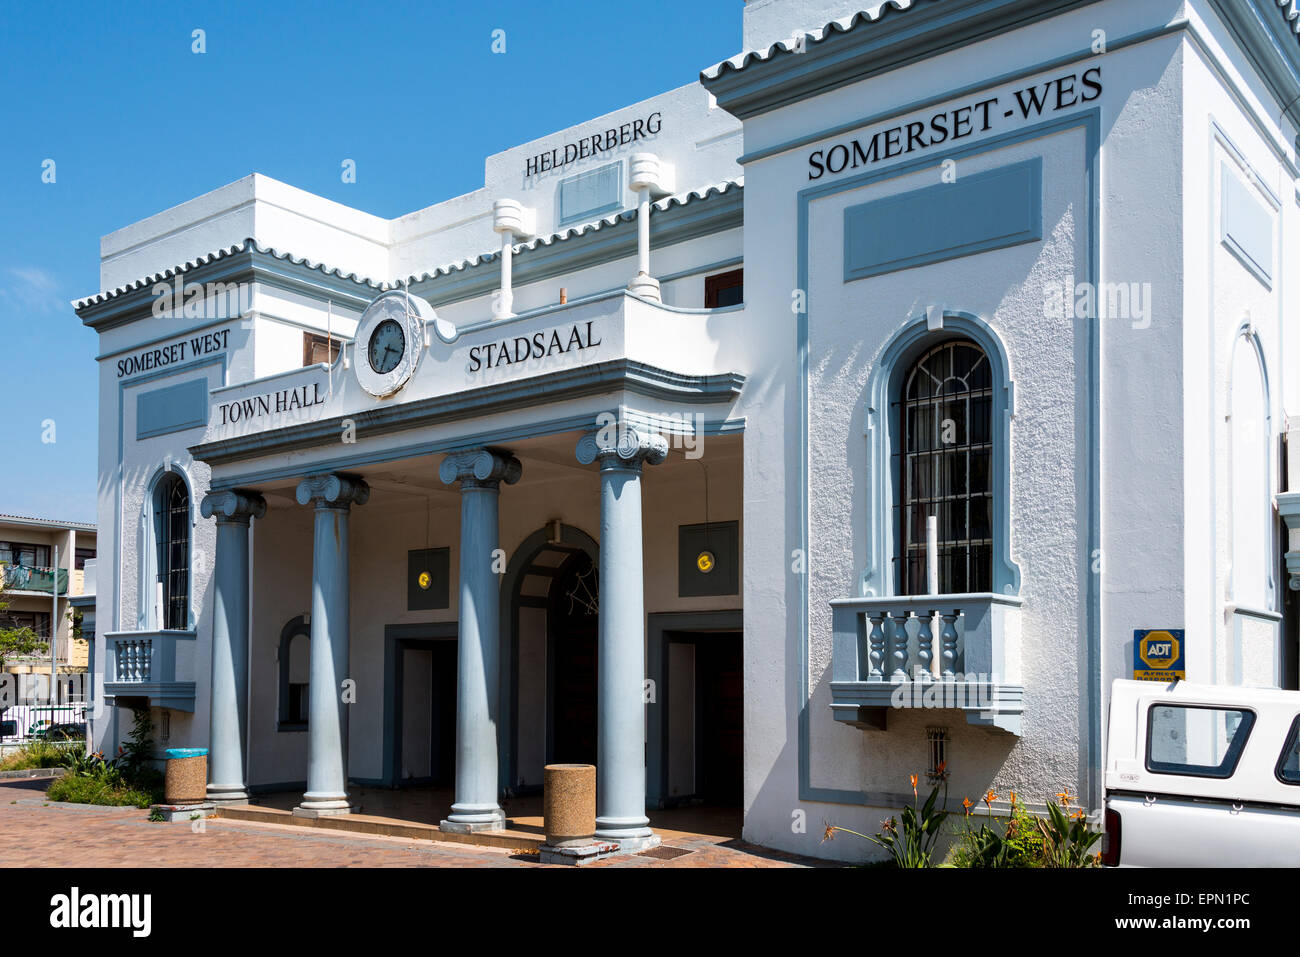 Town Hall, Main Street, Somerset West, Helderberg District, Cape Peninsula, Western Cape Province, Republic of South Africa Stock Photo